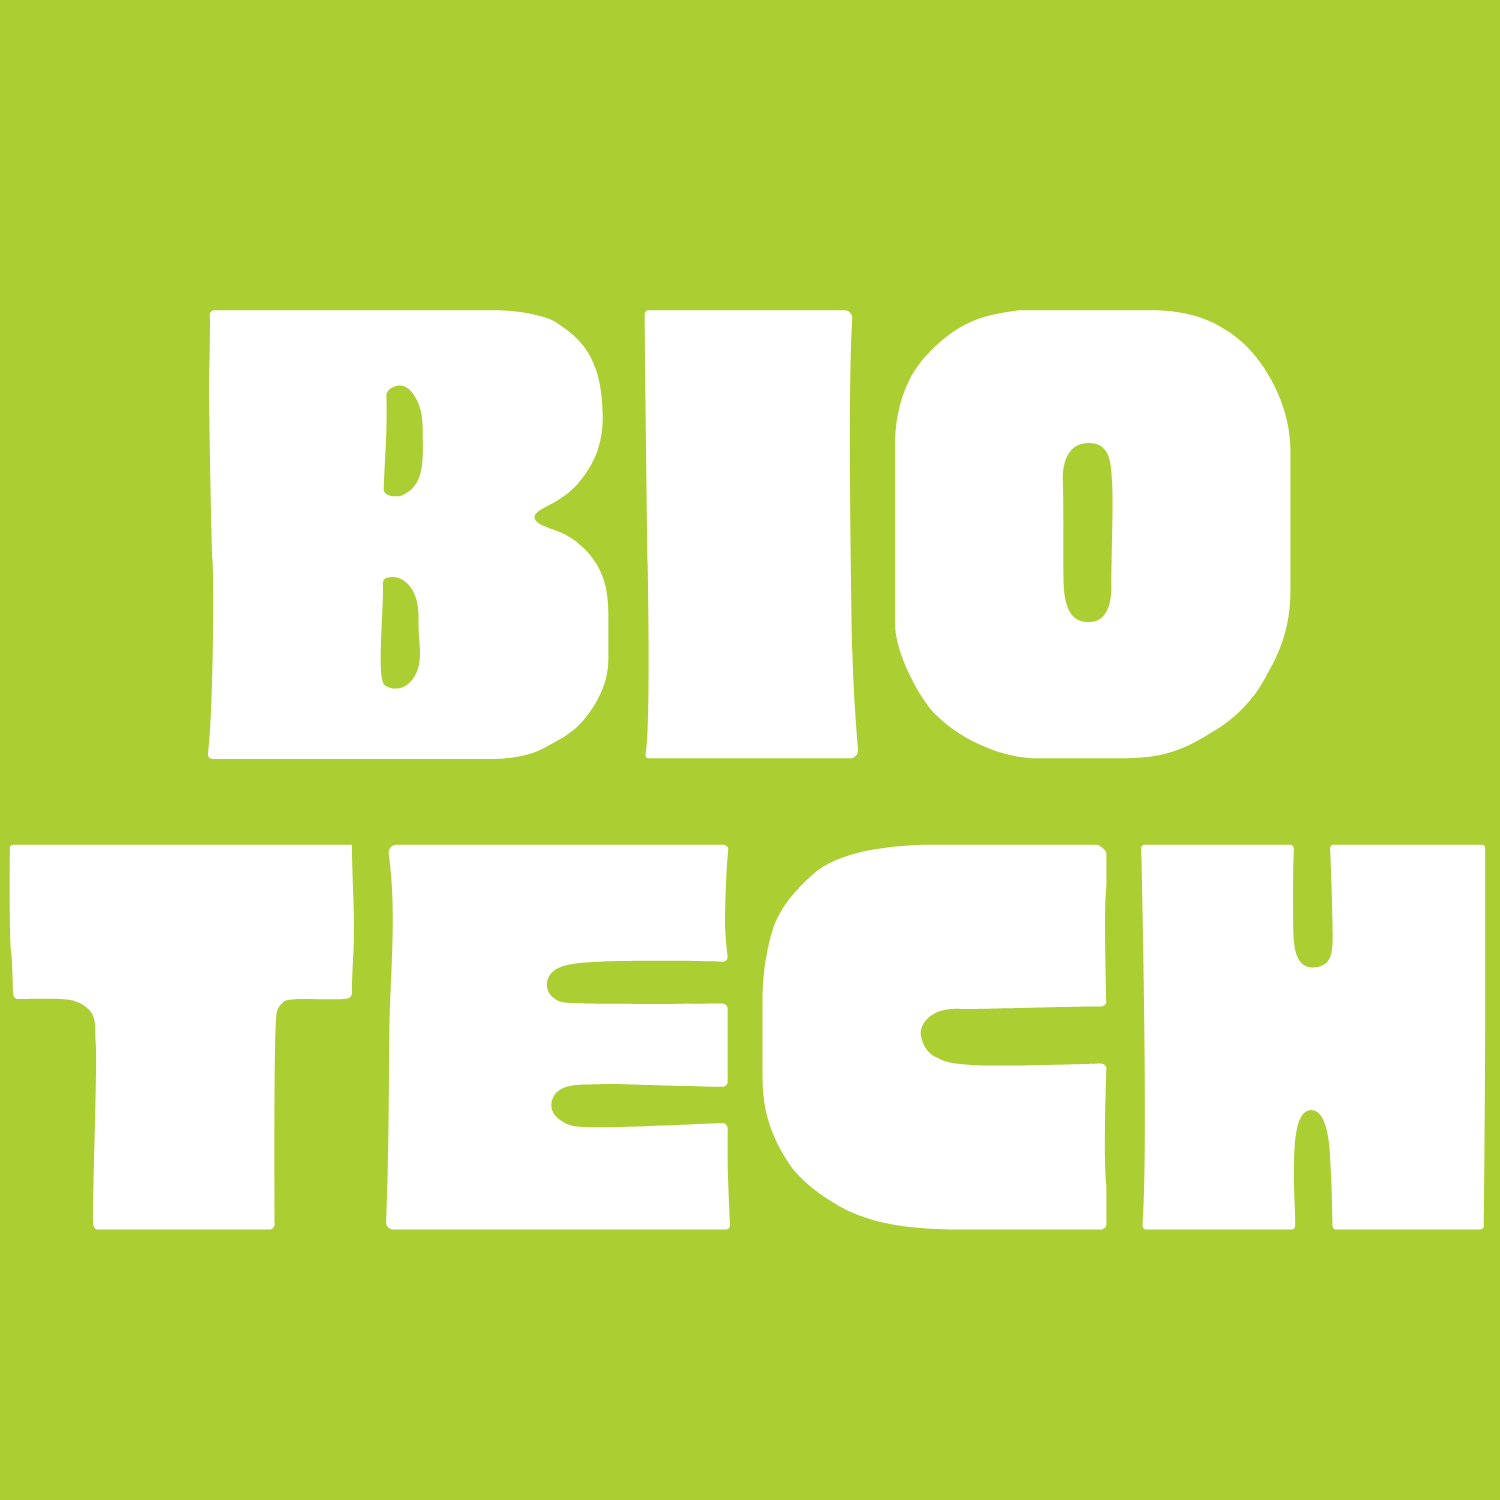 Biotech in Food Red to green Podcast season, synbio in food, synthetic biology, precision fermentation podcast, biomass fermentation podcast, gas fermentation podcast, molecular farming podcast